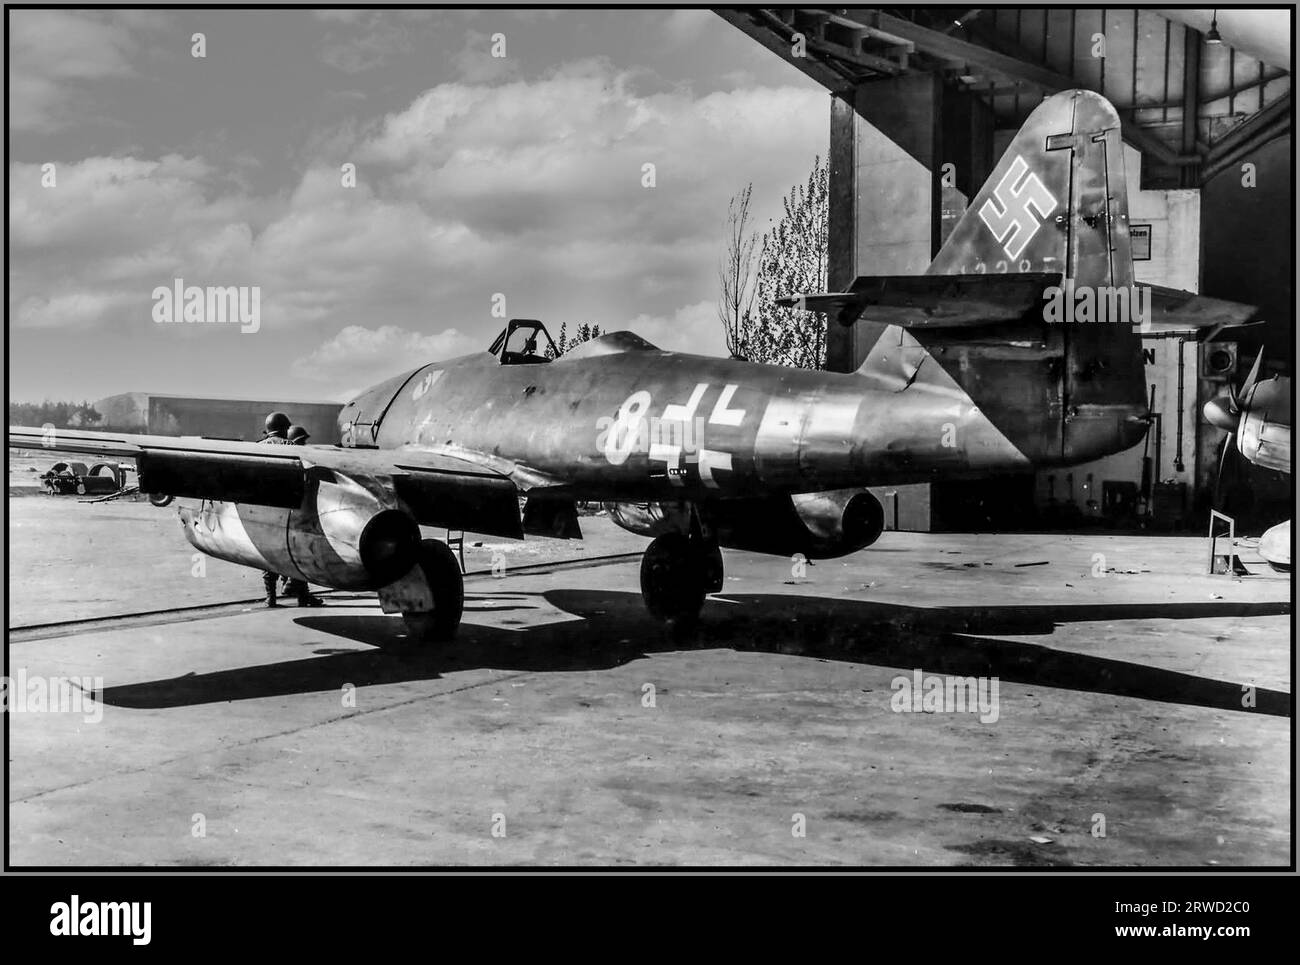 NAZI JET Messerschmitt Me 262 Luftwaffe 1945 post-WW2, nicknamed Schwalbe (German: 'Swallow') in fighter versions, or Sturmvogel (German: 'Storm Bird') in fighter-bomber versions, was a fighter aircraft and fighter-bomber that was designed and produced by the German aircraft manufacturer Messerschmitt. It was the world's first operational jet-powered fighter aircraft.  The design of what would become the Me 262 started in April 1939, before World War II. It made its maiden flight on 18 April 1941 with a piston engine, and its first jet-powered flight on 18 July 1942. Stock Photo